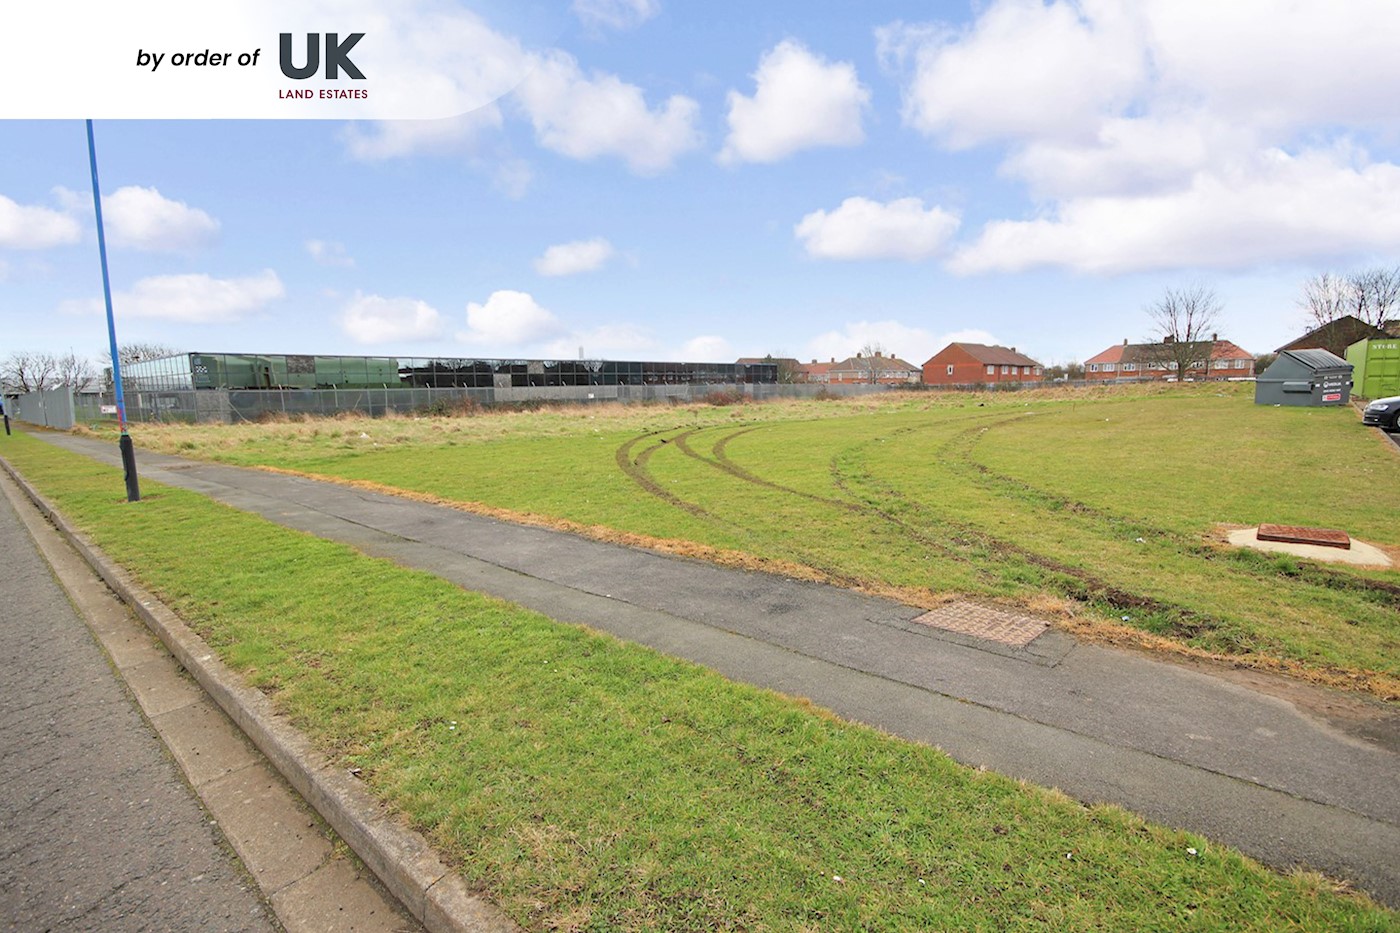 Plot 3 Park View Industrial Estate, Prospect Way, Hartlepool, TS25 1UD 1/4